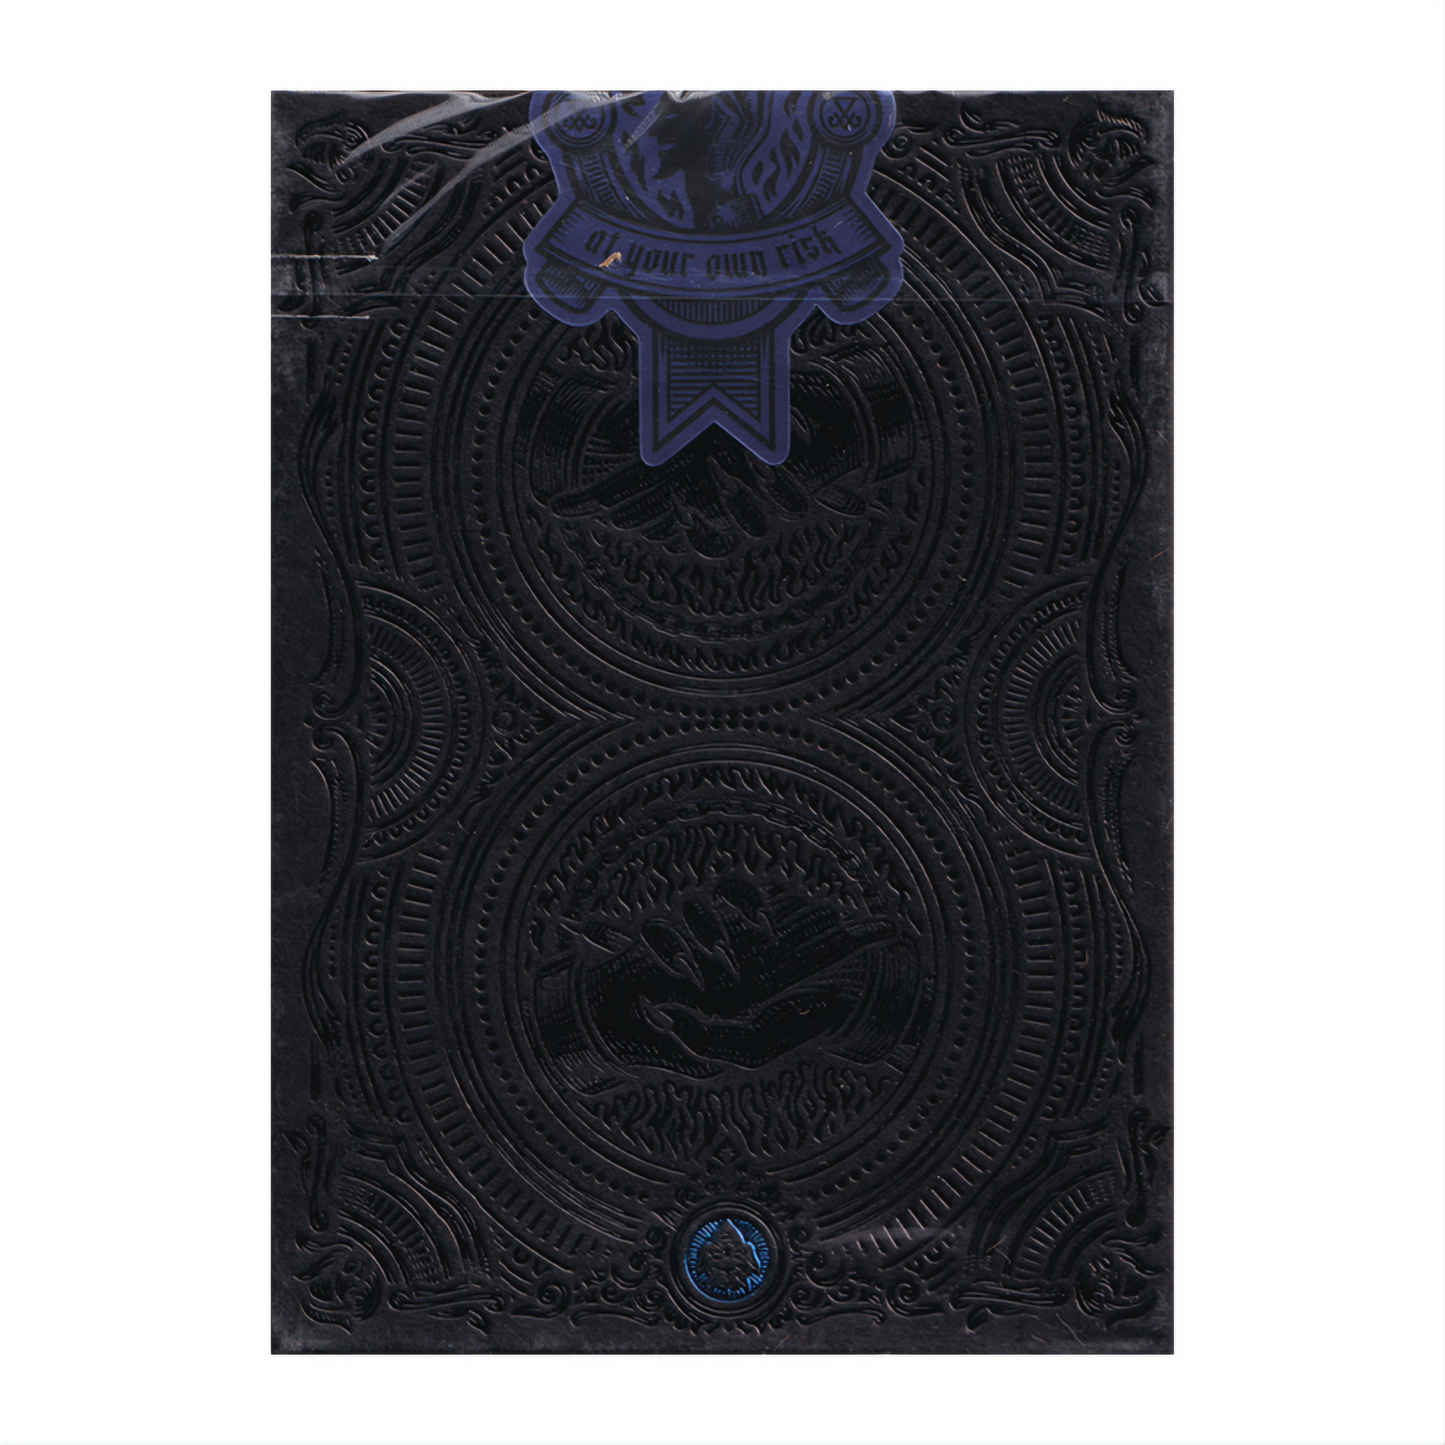 Deal with the Devil (Cobalt Blue) by Darkside Playing Cards Co. : Playing Cards, Poker, Magic, Cardistry,singapore